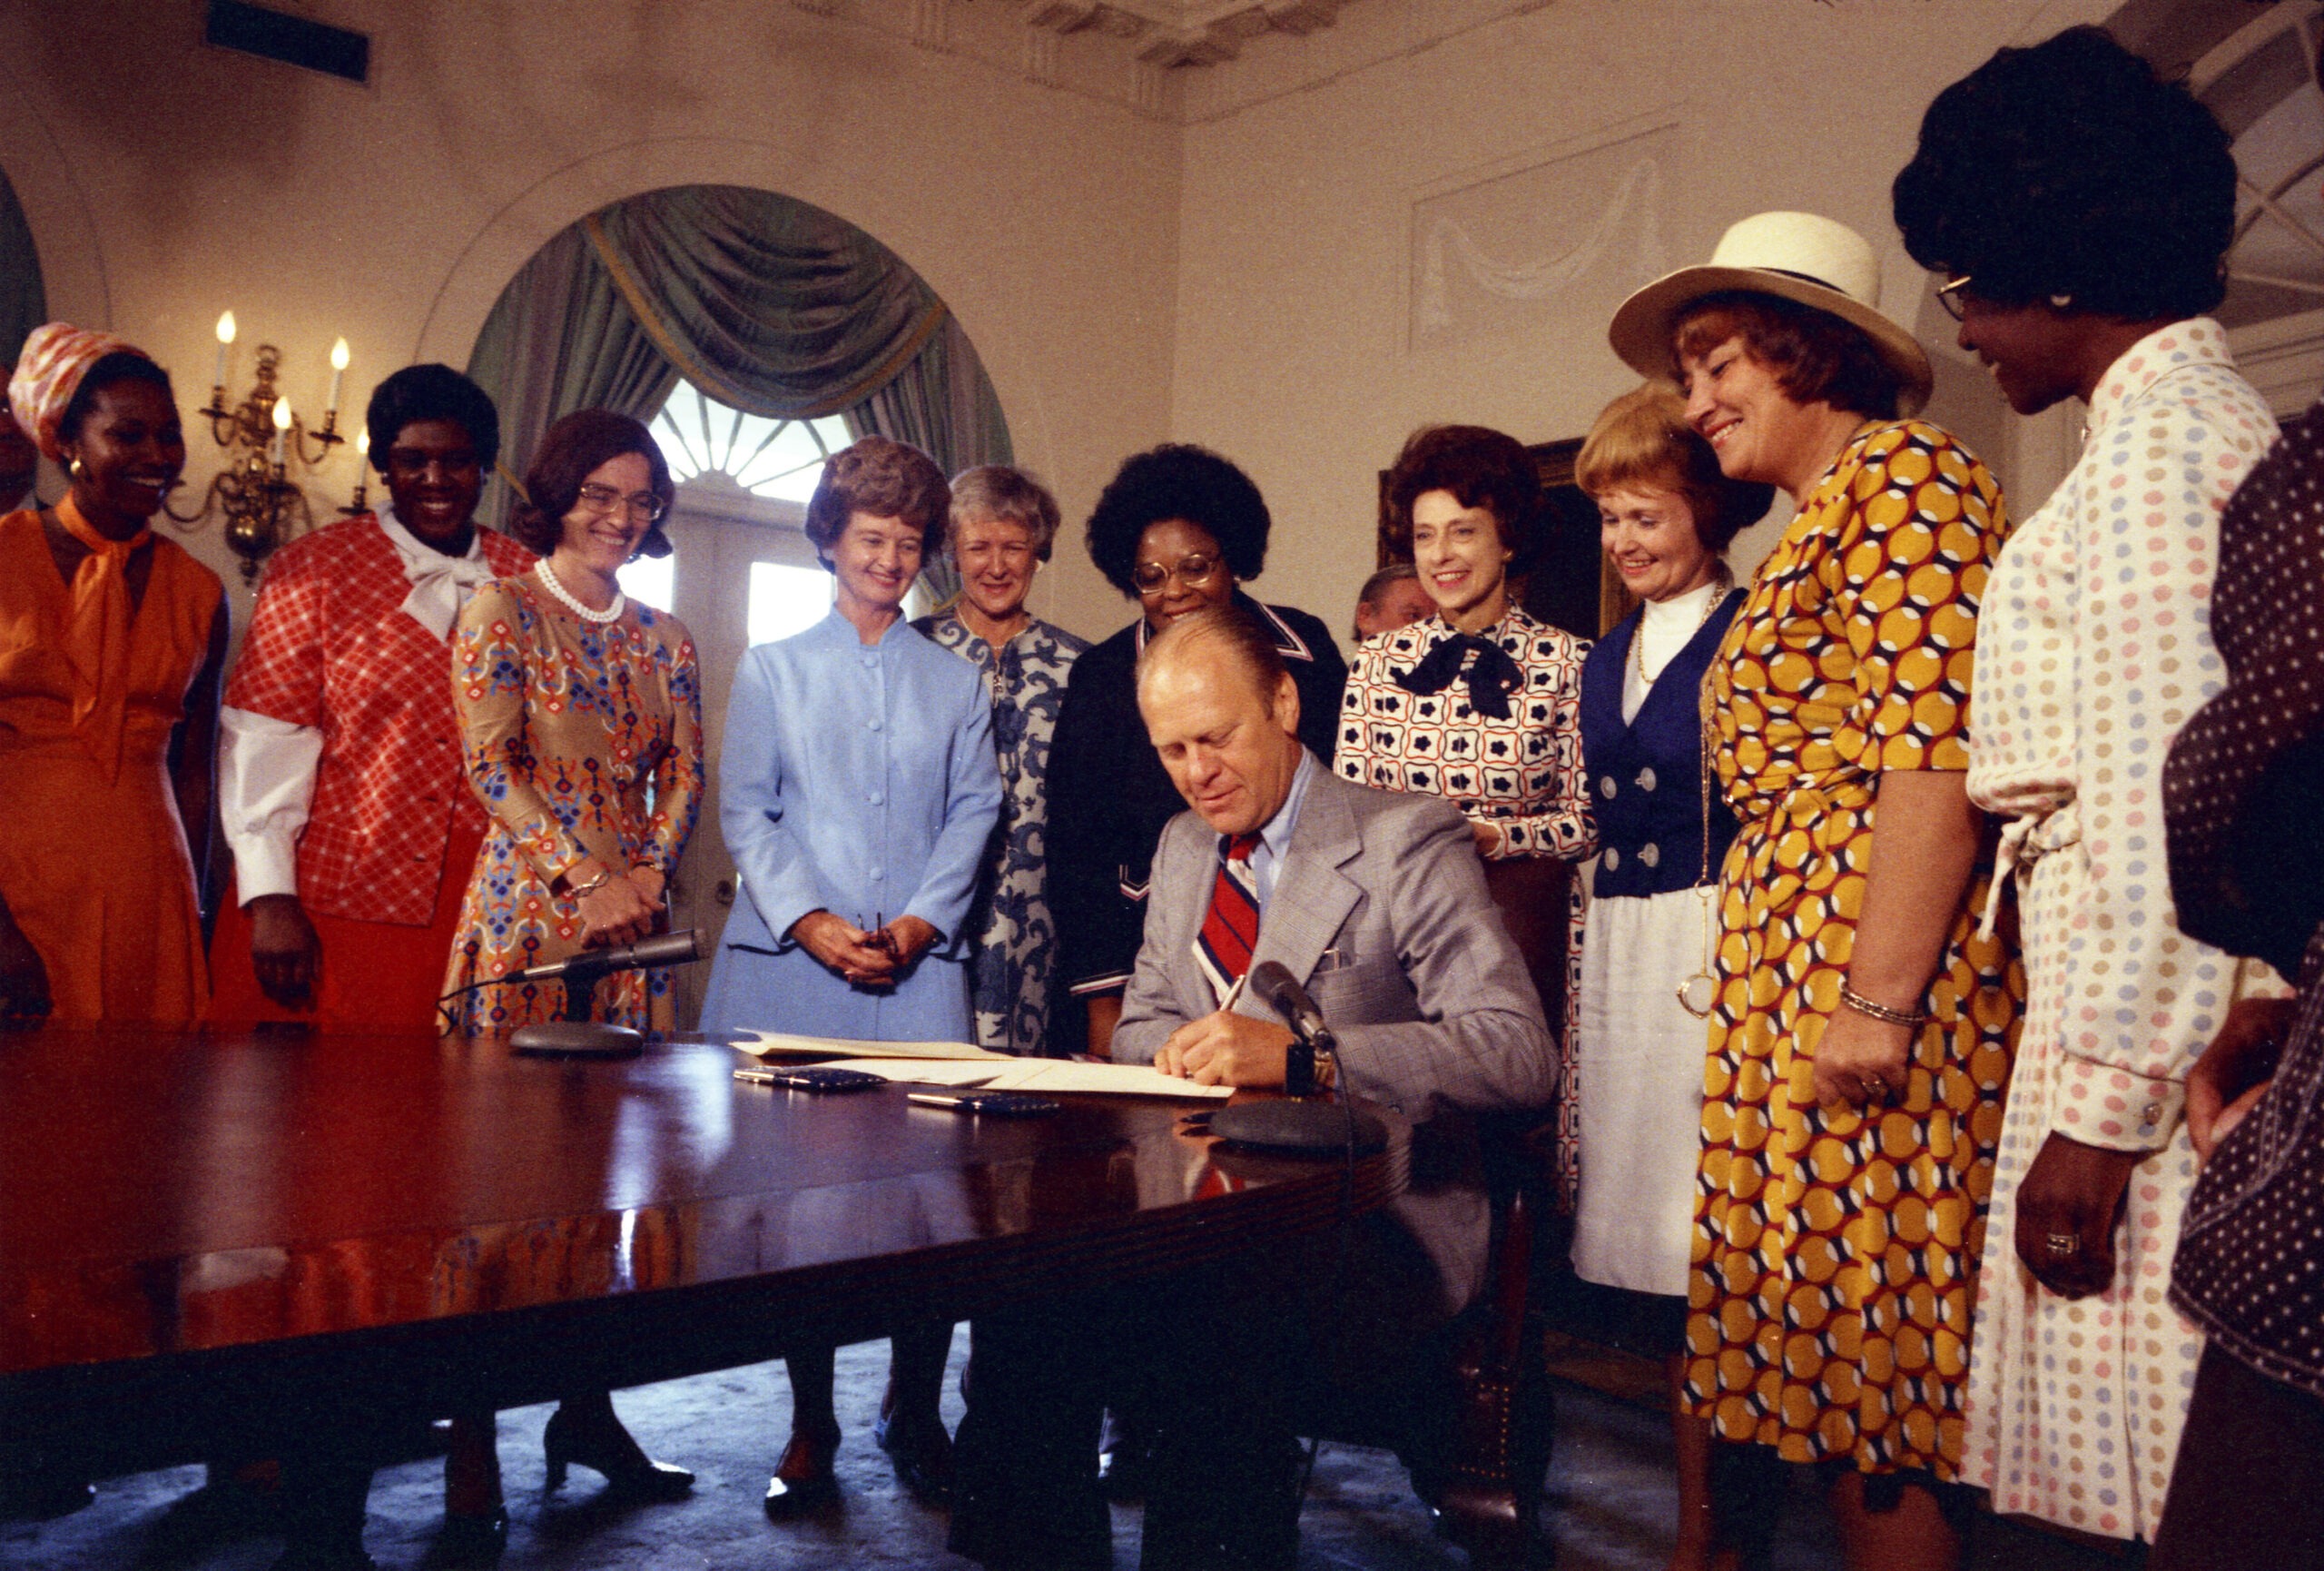 women surrounding the president signing the Proclamation on Women's Equality Day